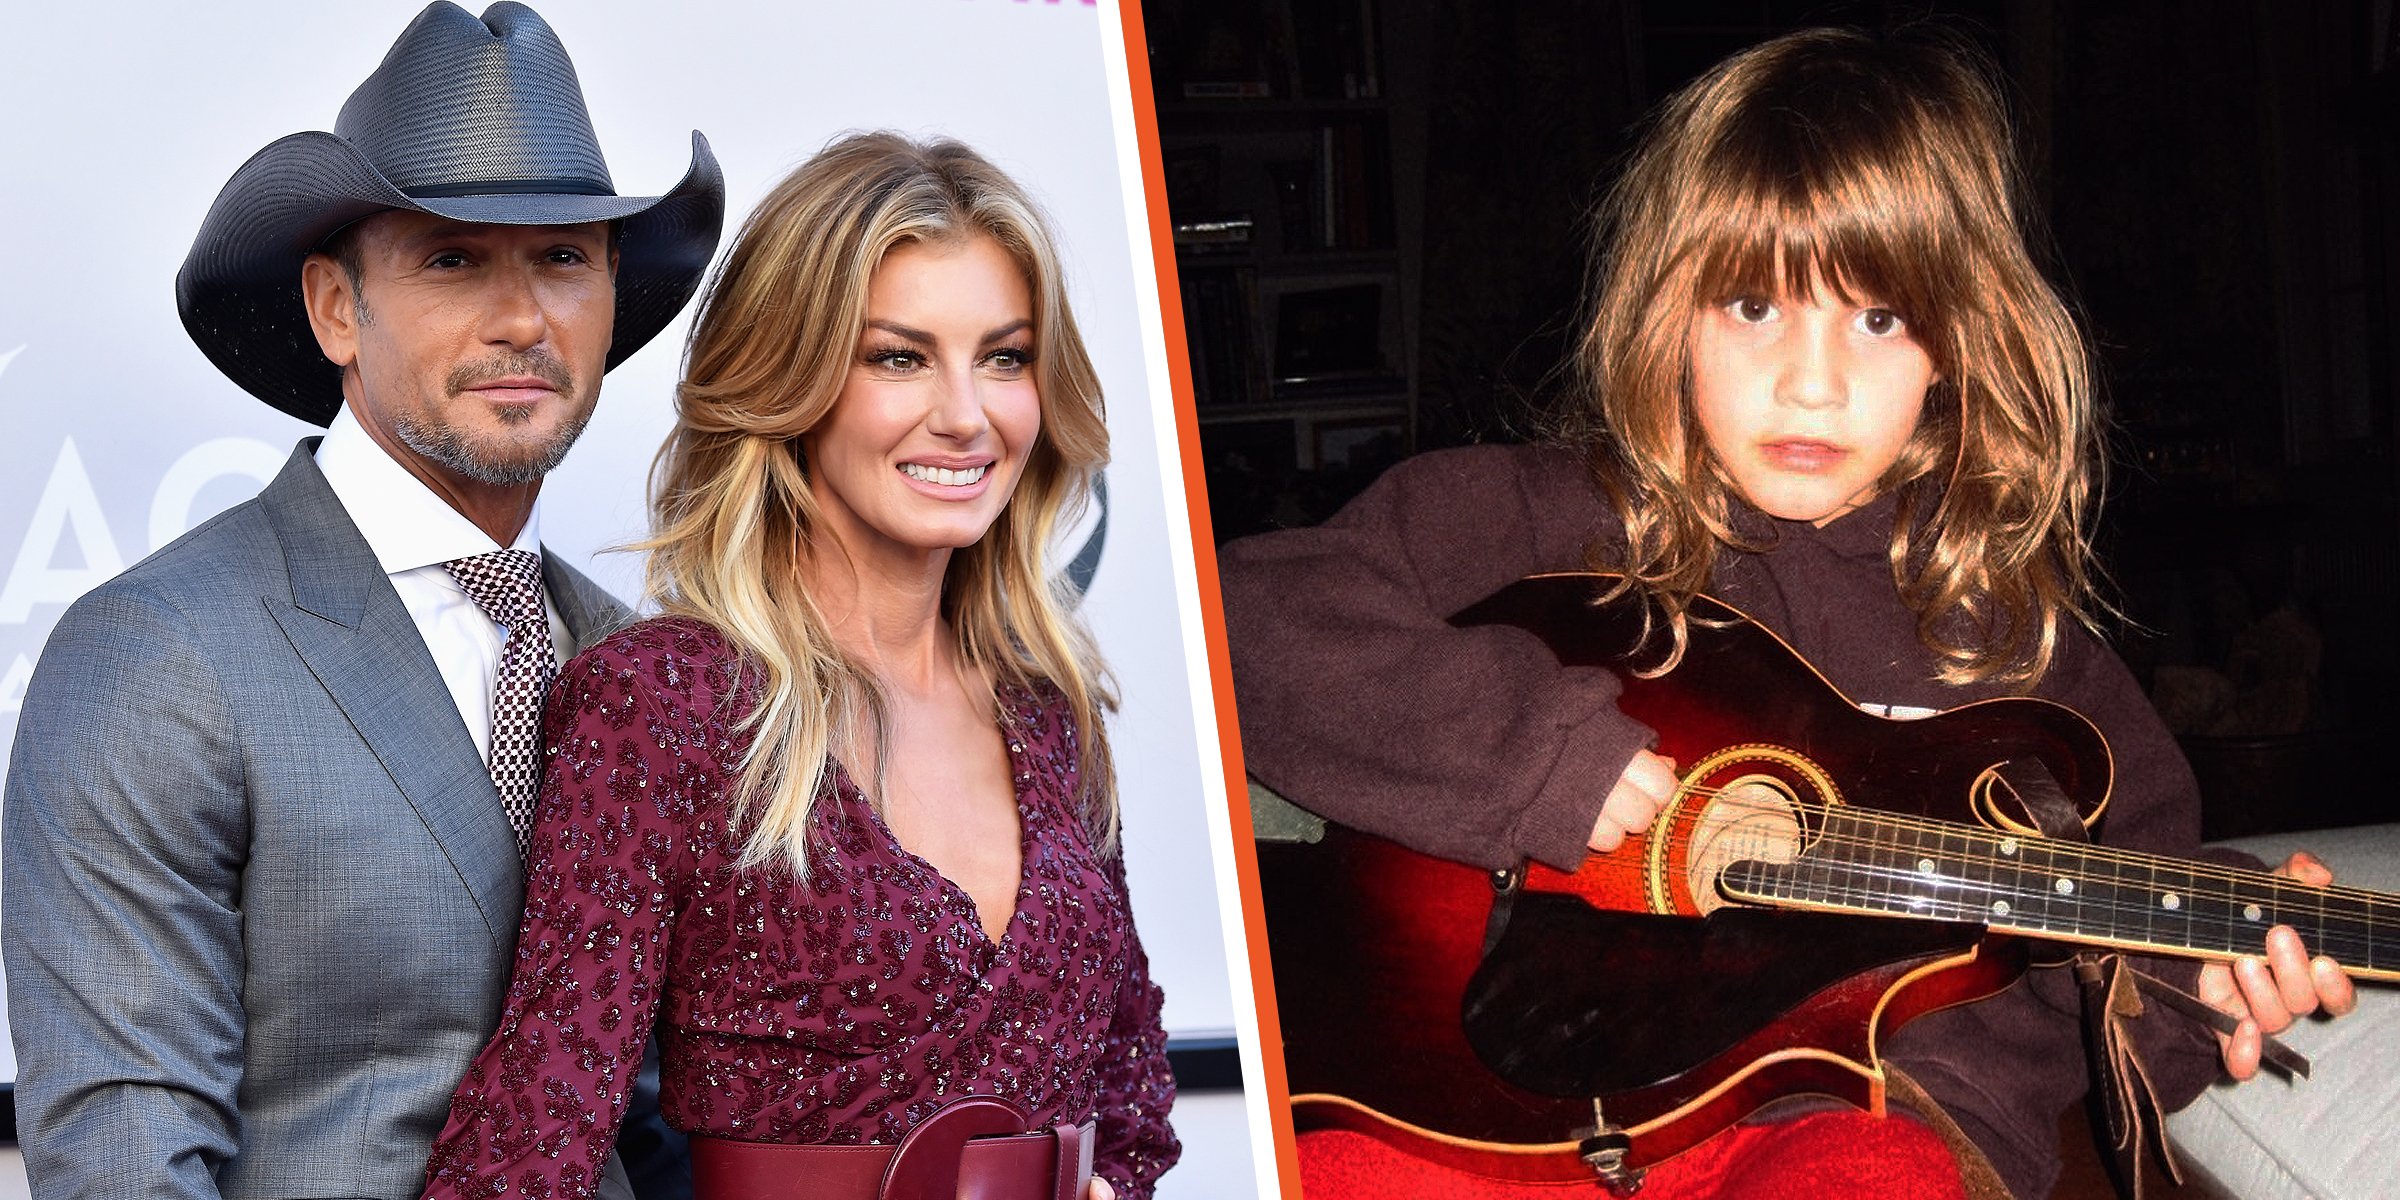 Tim McGraw's Daughter Was Slammed for 'Disturbing' Modeling - Now She Is  Compared to 'Mona Lisa' in New Pics